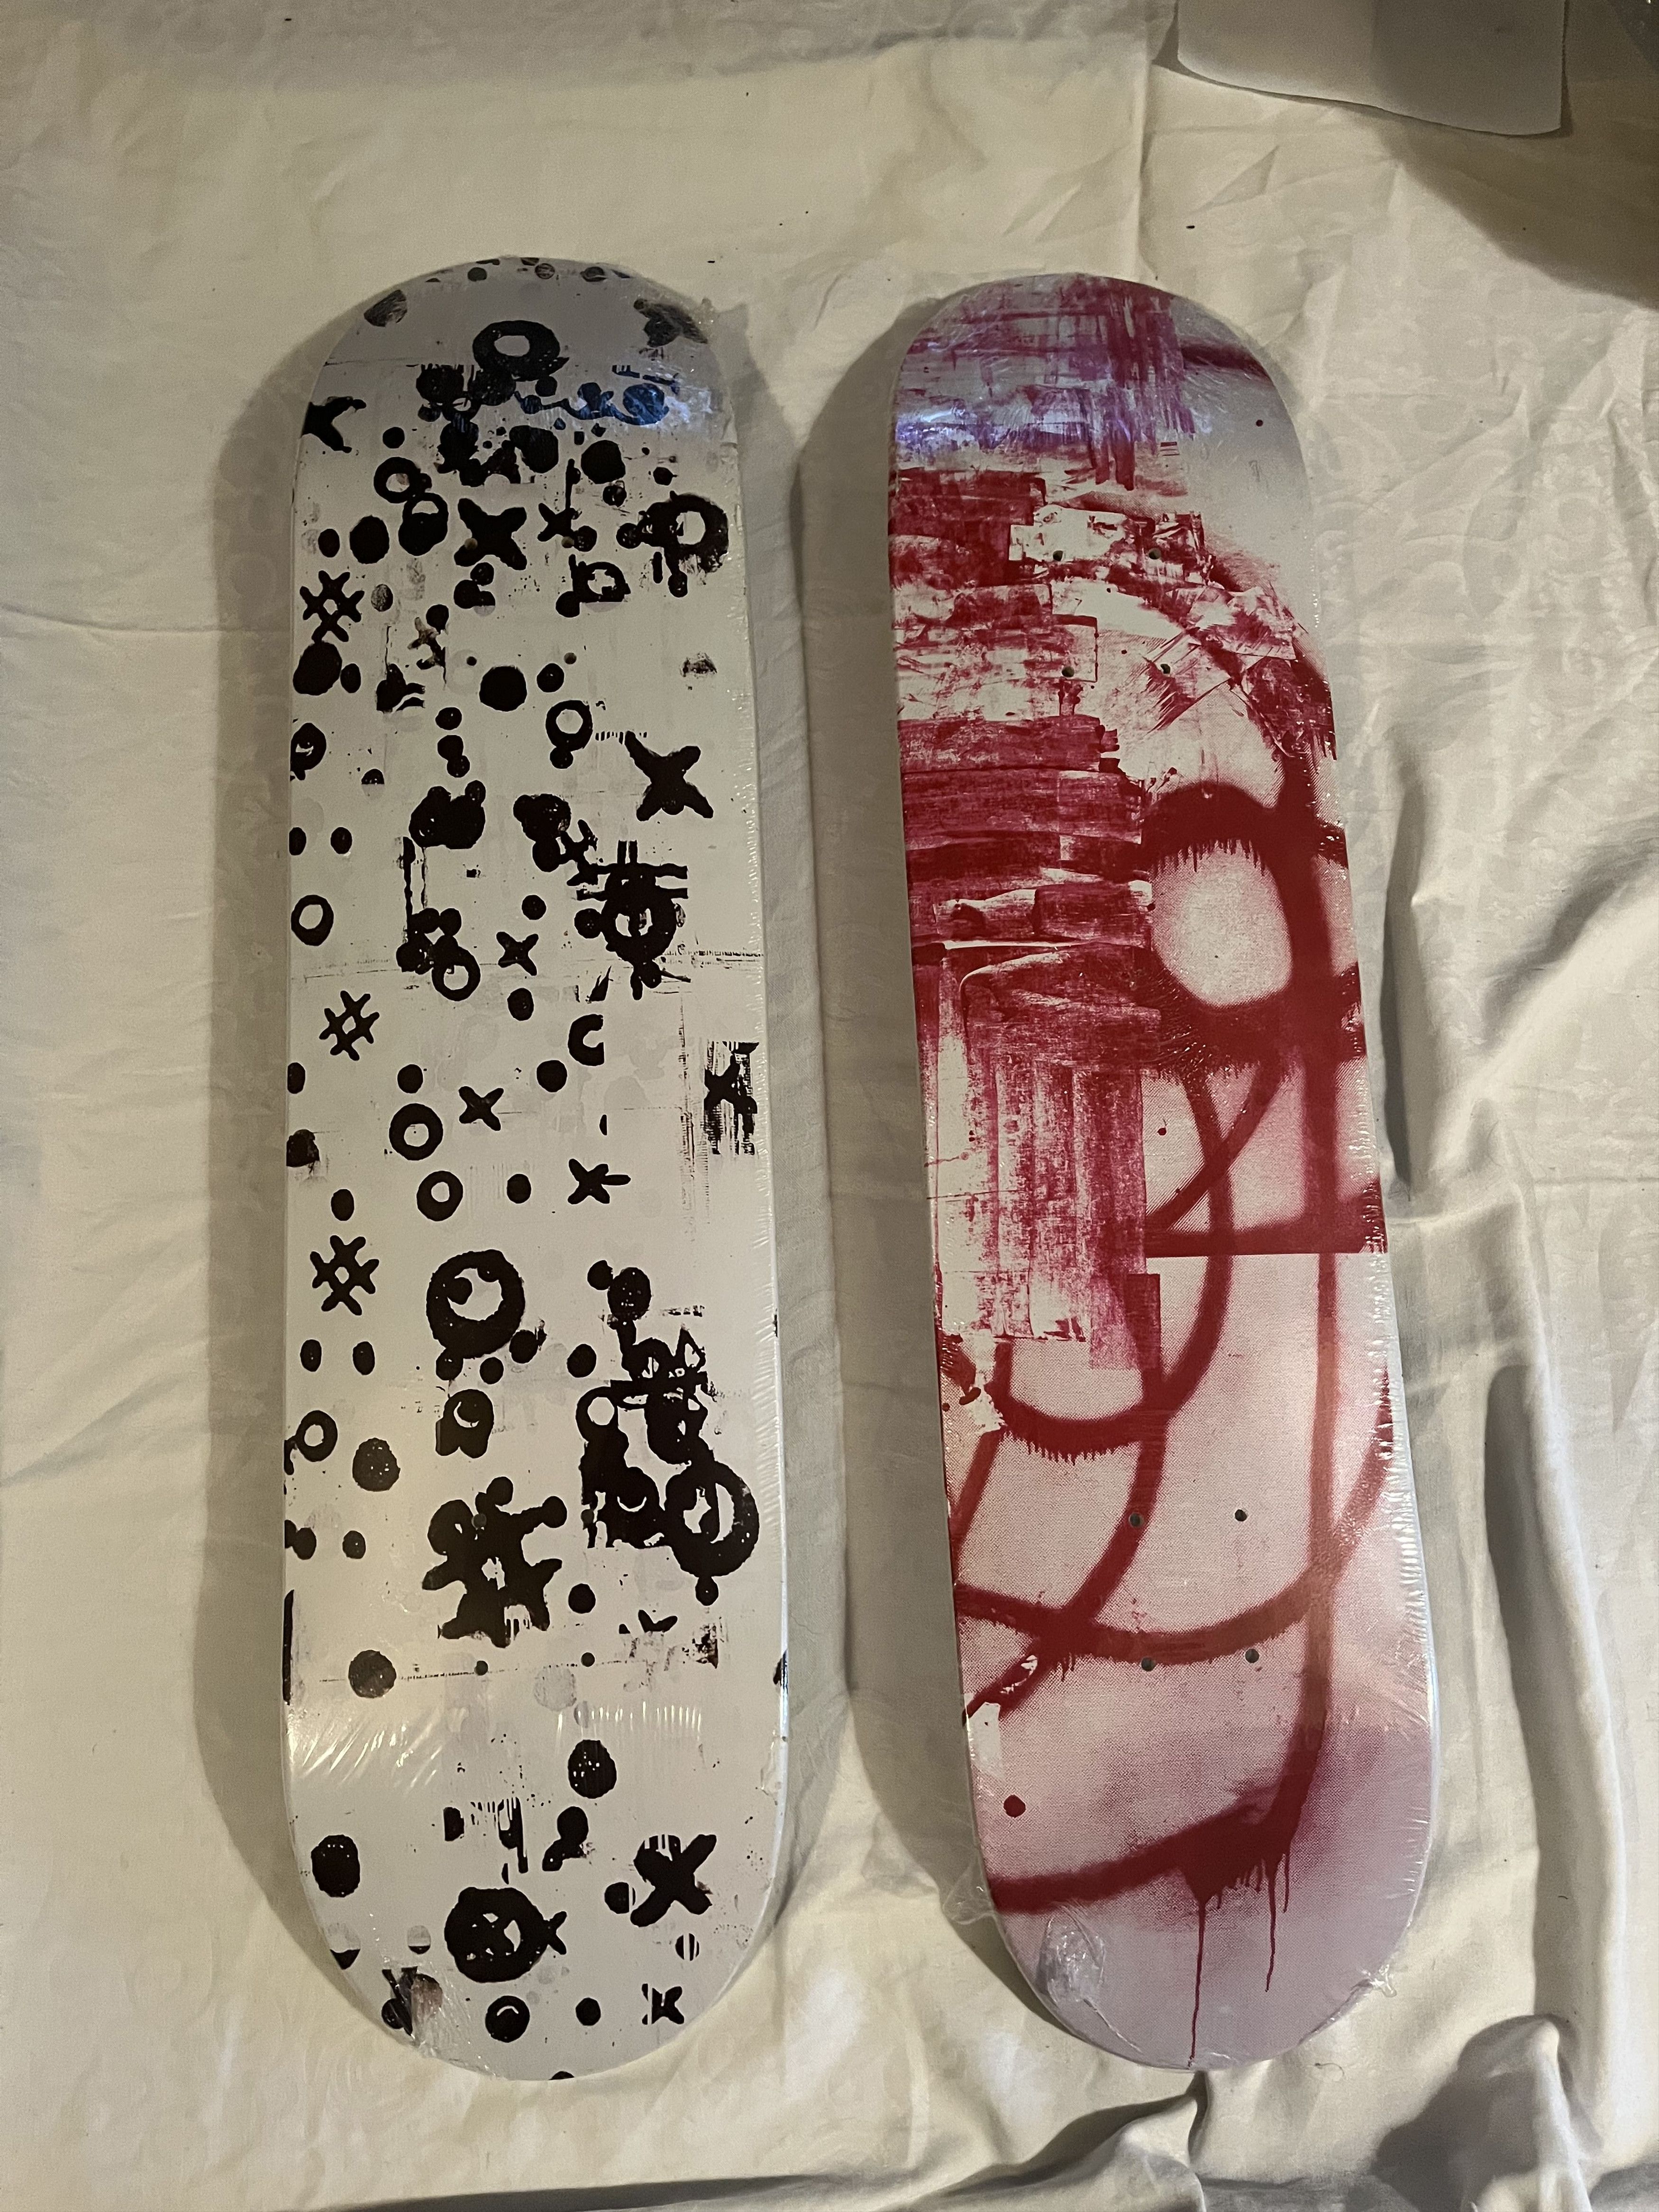 Christopher Wool x Supreme Skate Deck (2008) - Red/White